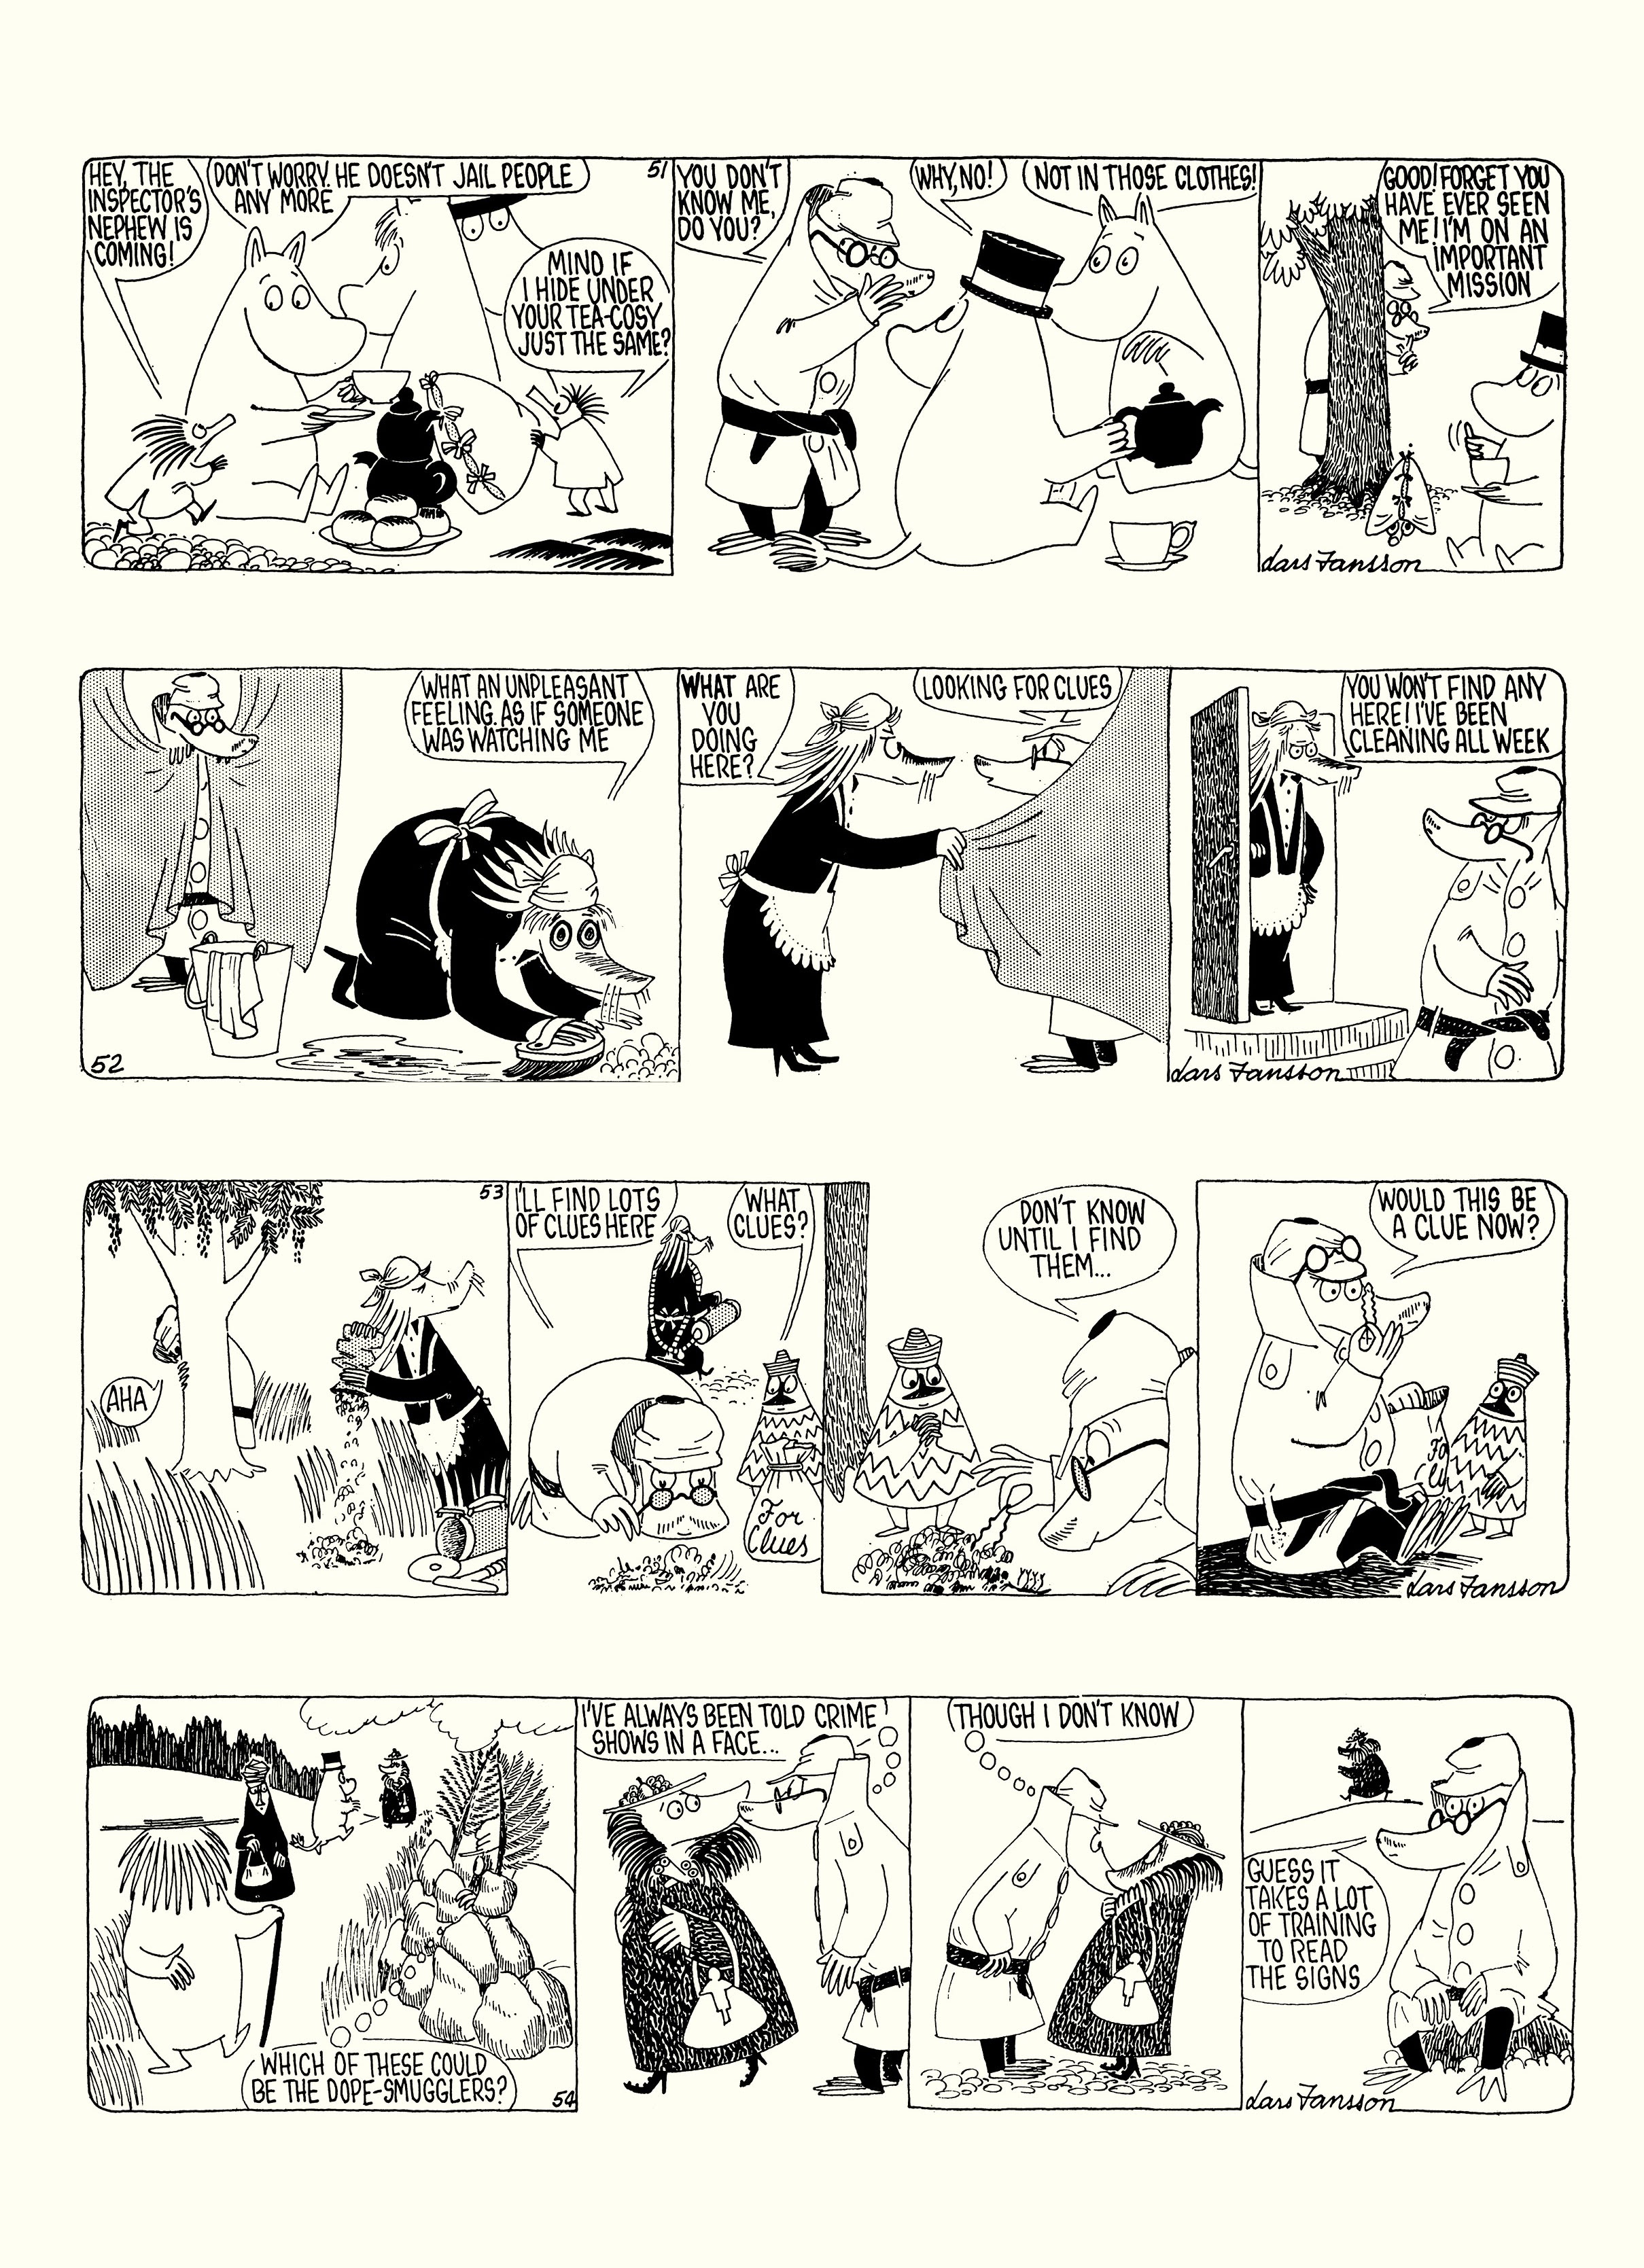 Read online Moomin: The Complete Lars Jansson Comic Strip comic -  Issue # TPB 8 - 84